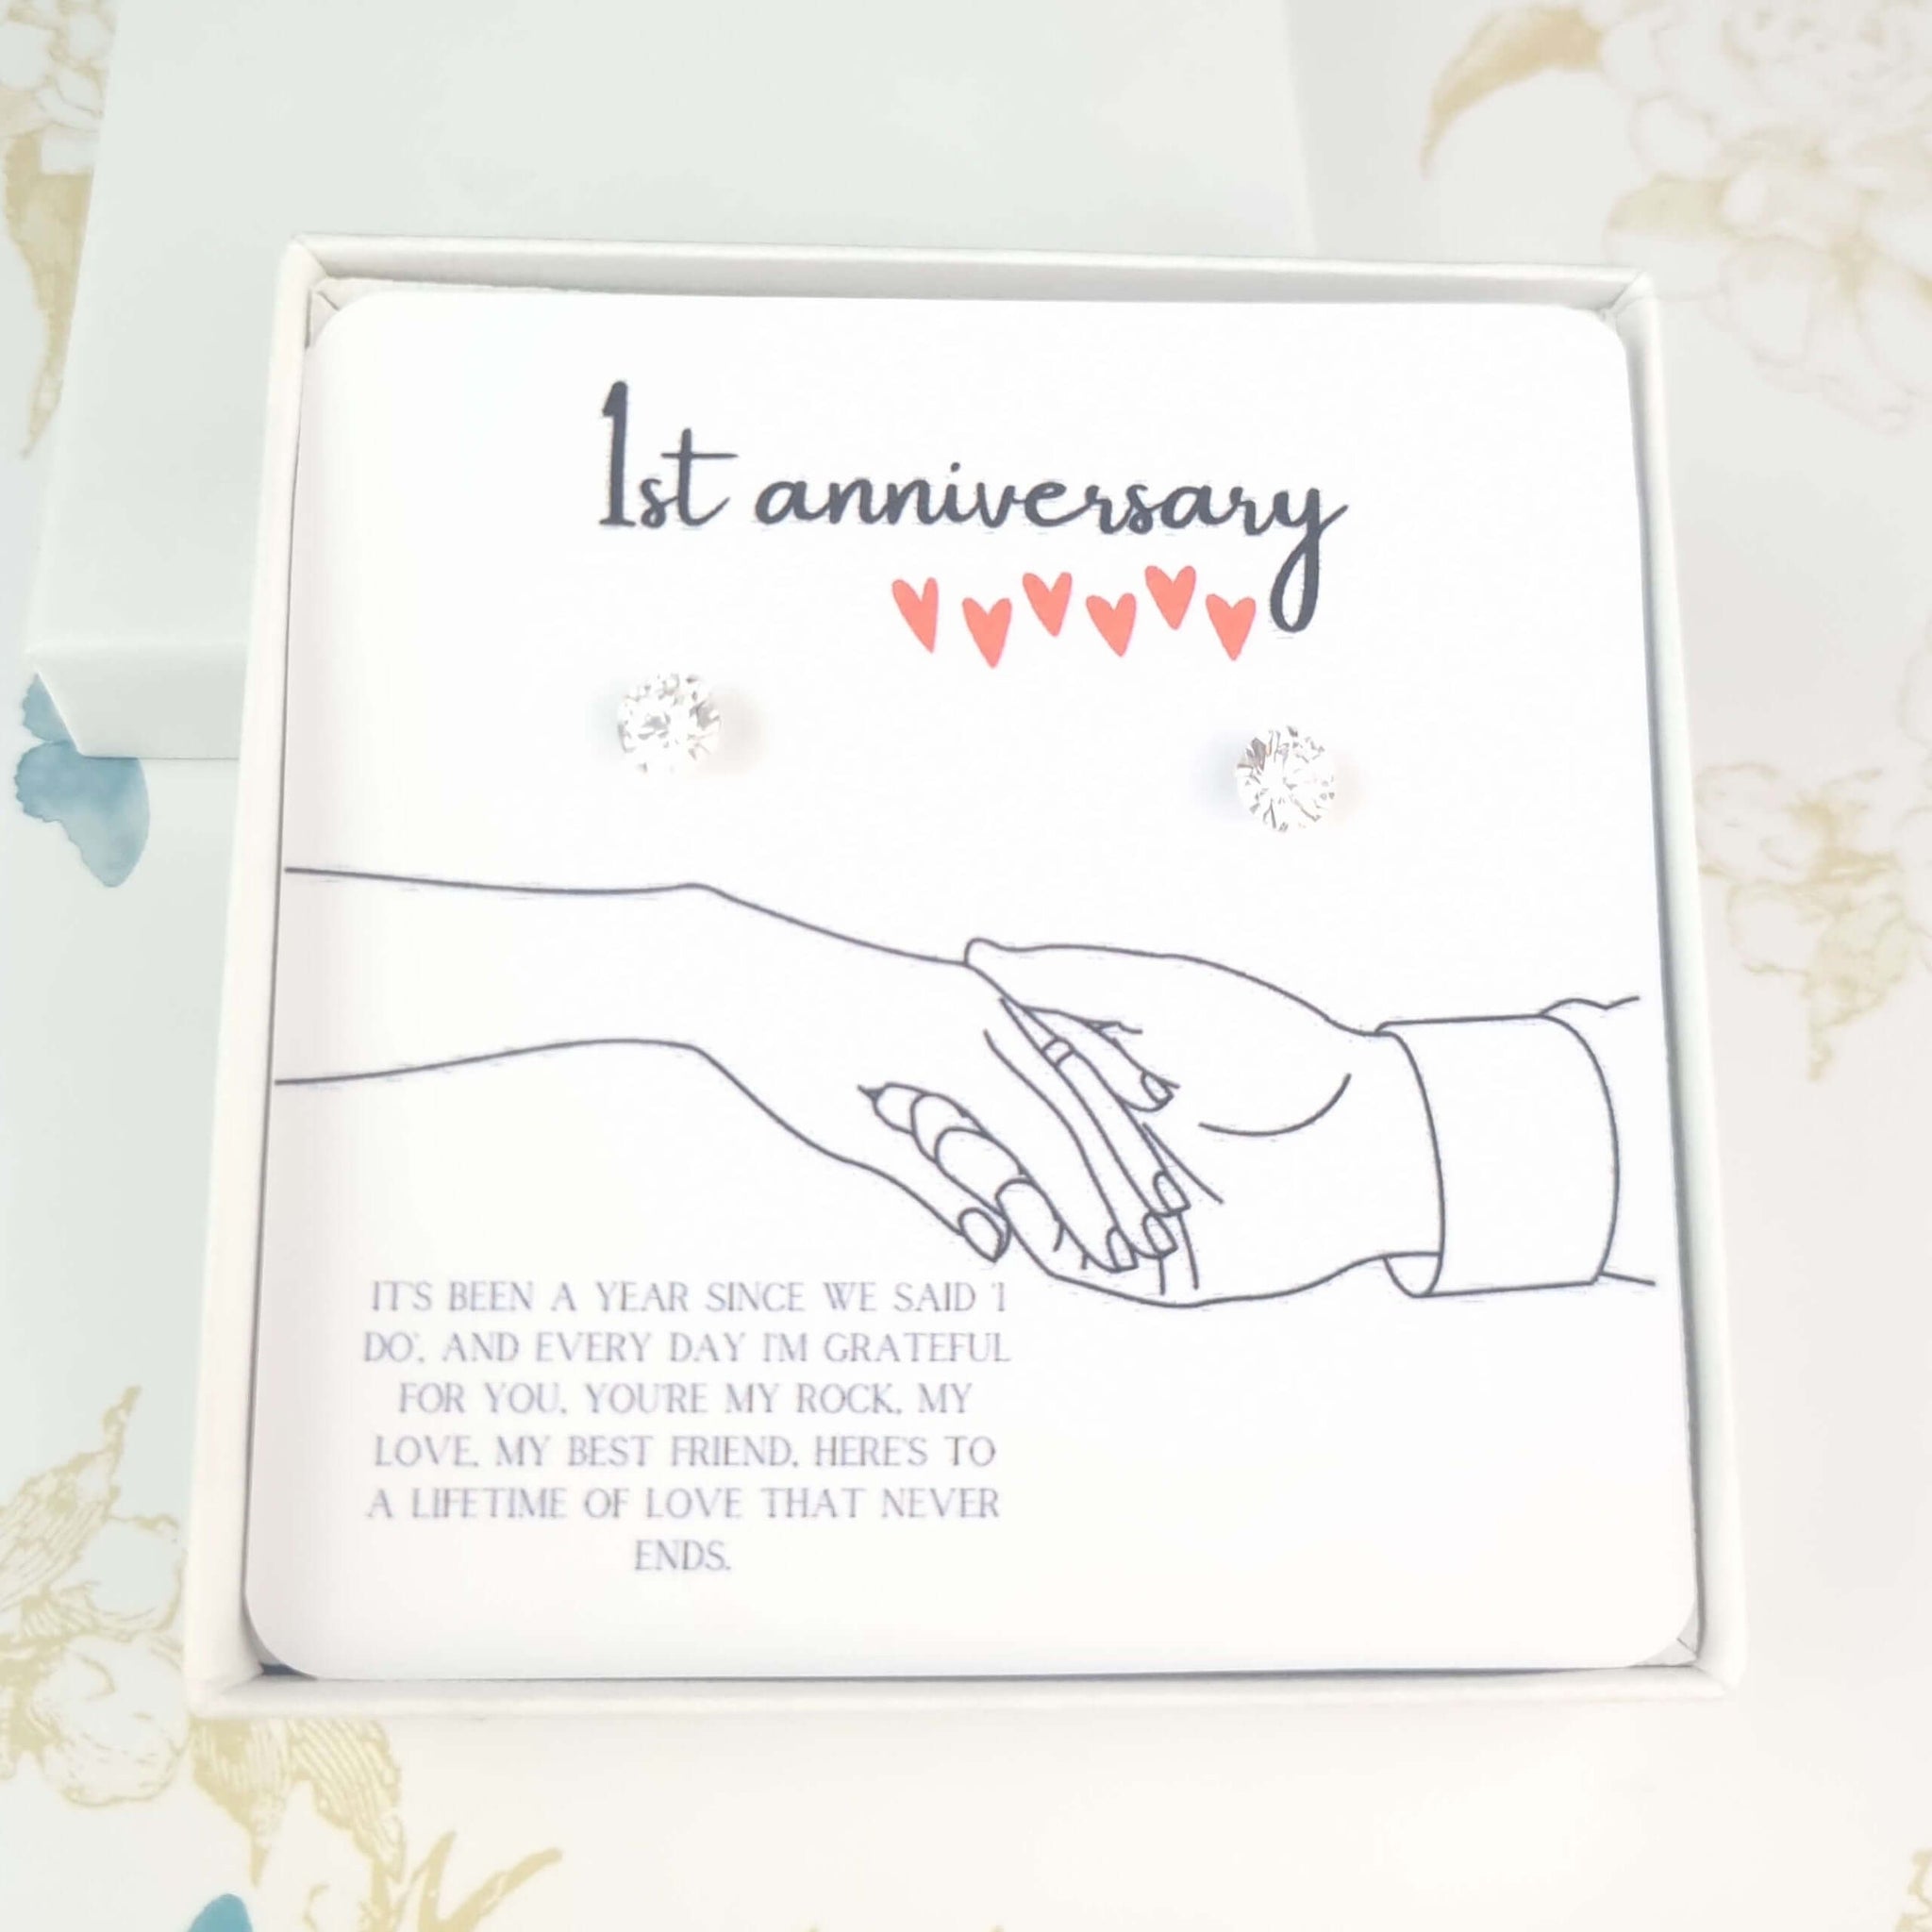 1st anniversary gift card with silver earrings